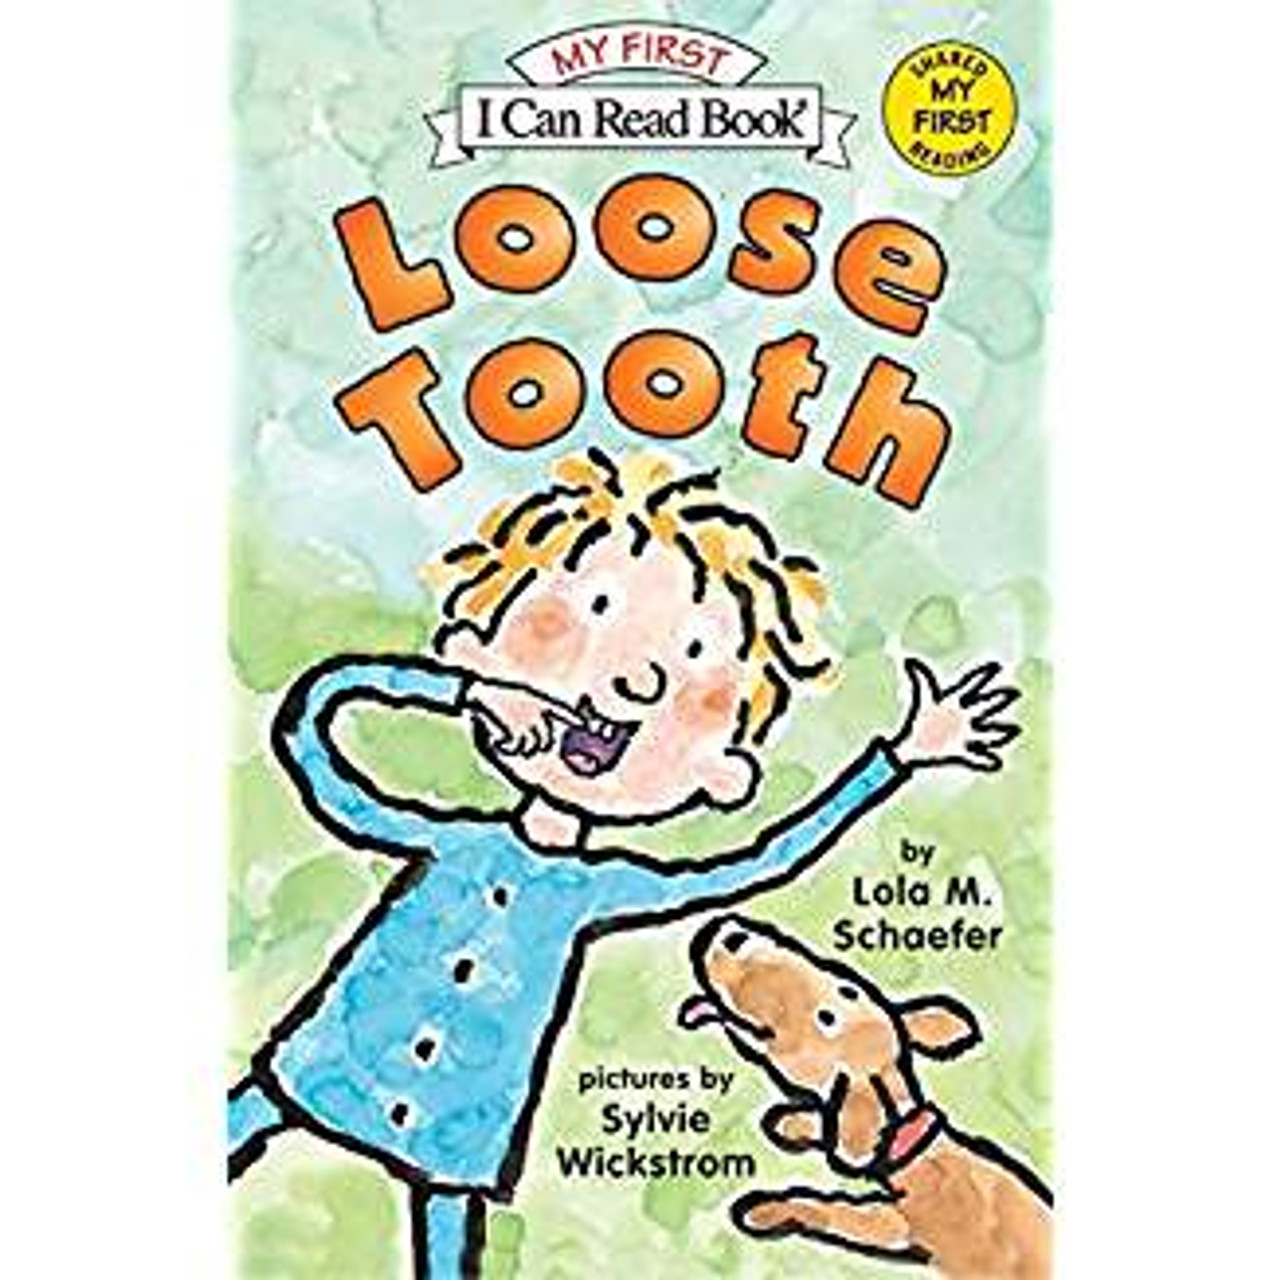 A young boy wakes up one morning to find he has his very first loose tooth. But no matter what he does, it won't come out.